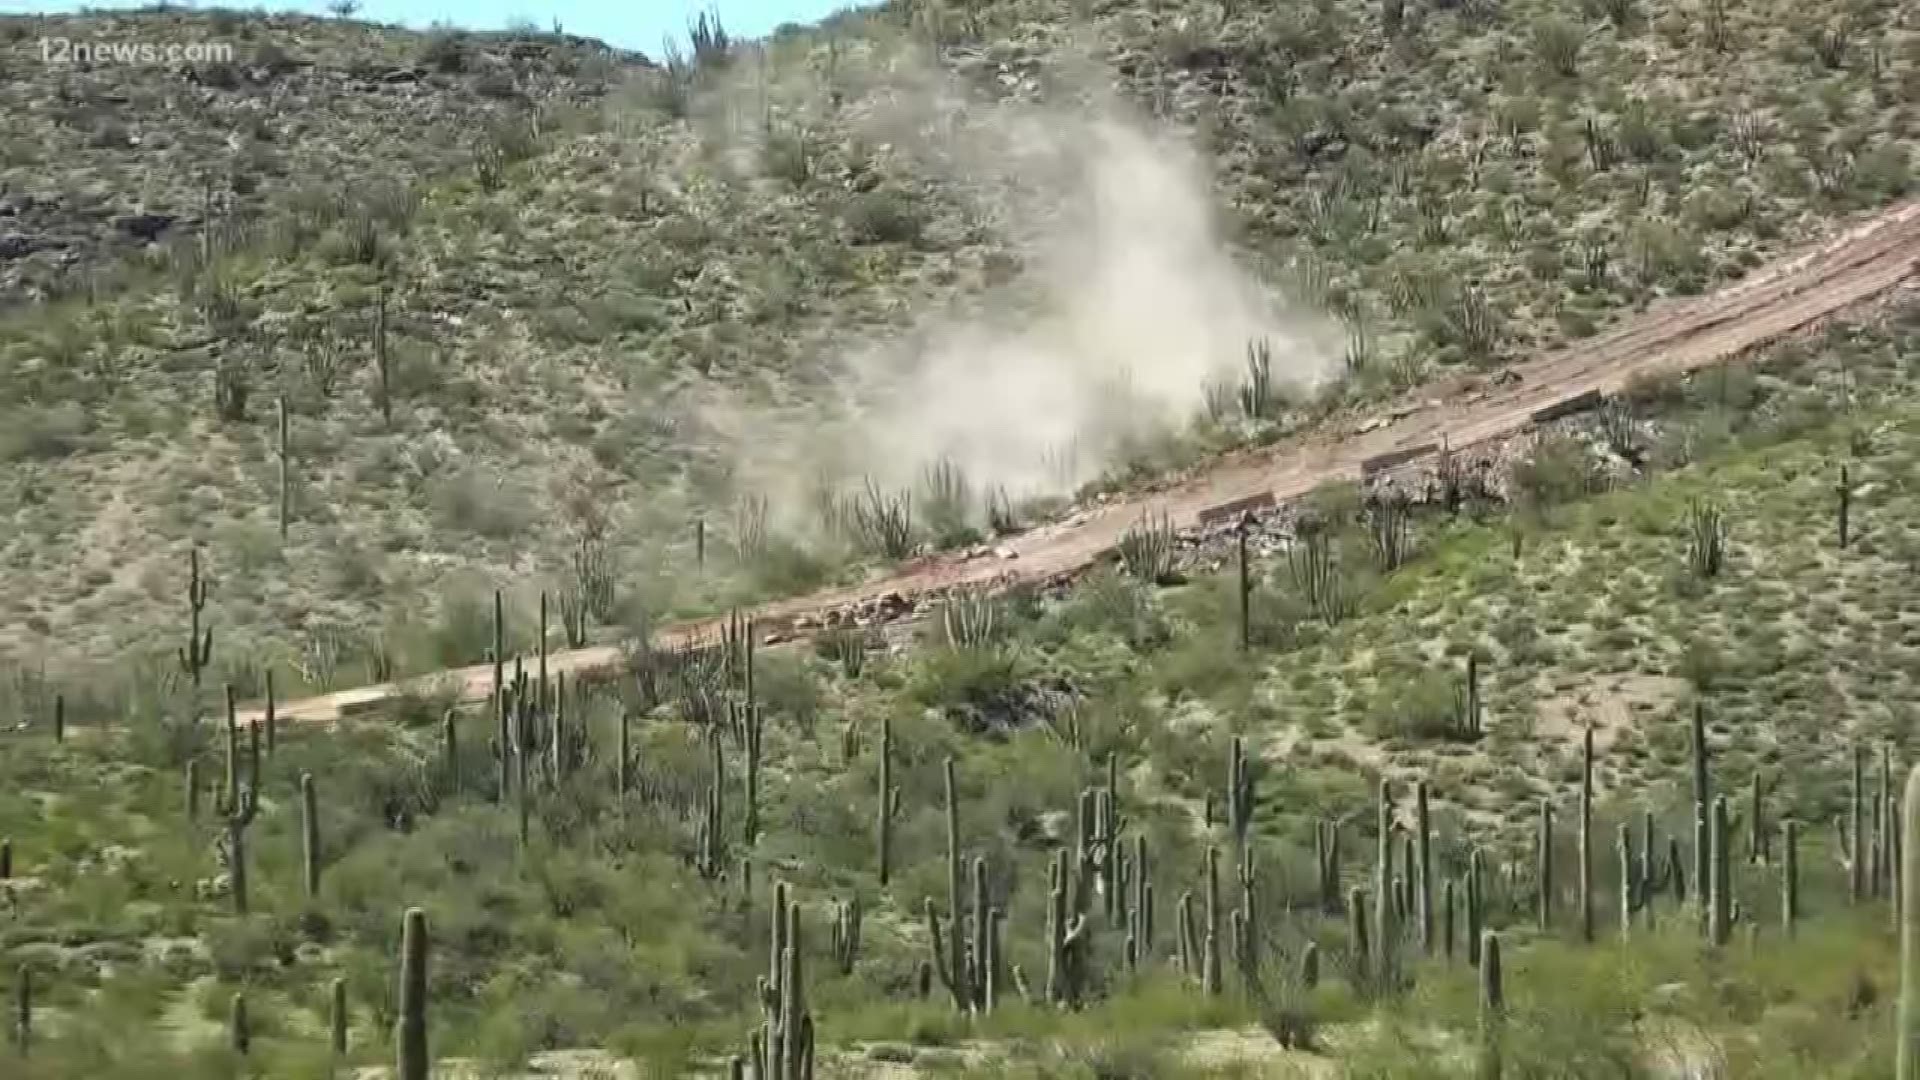 Small explosions were set off along the southern border with Mexico in Organ Pipe National Monument. The border patrol was clearing land for the border wall.